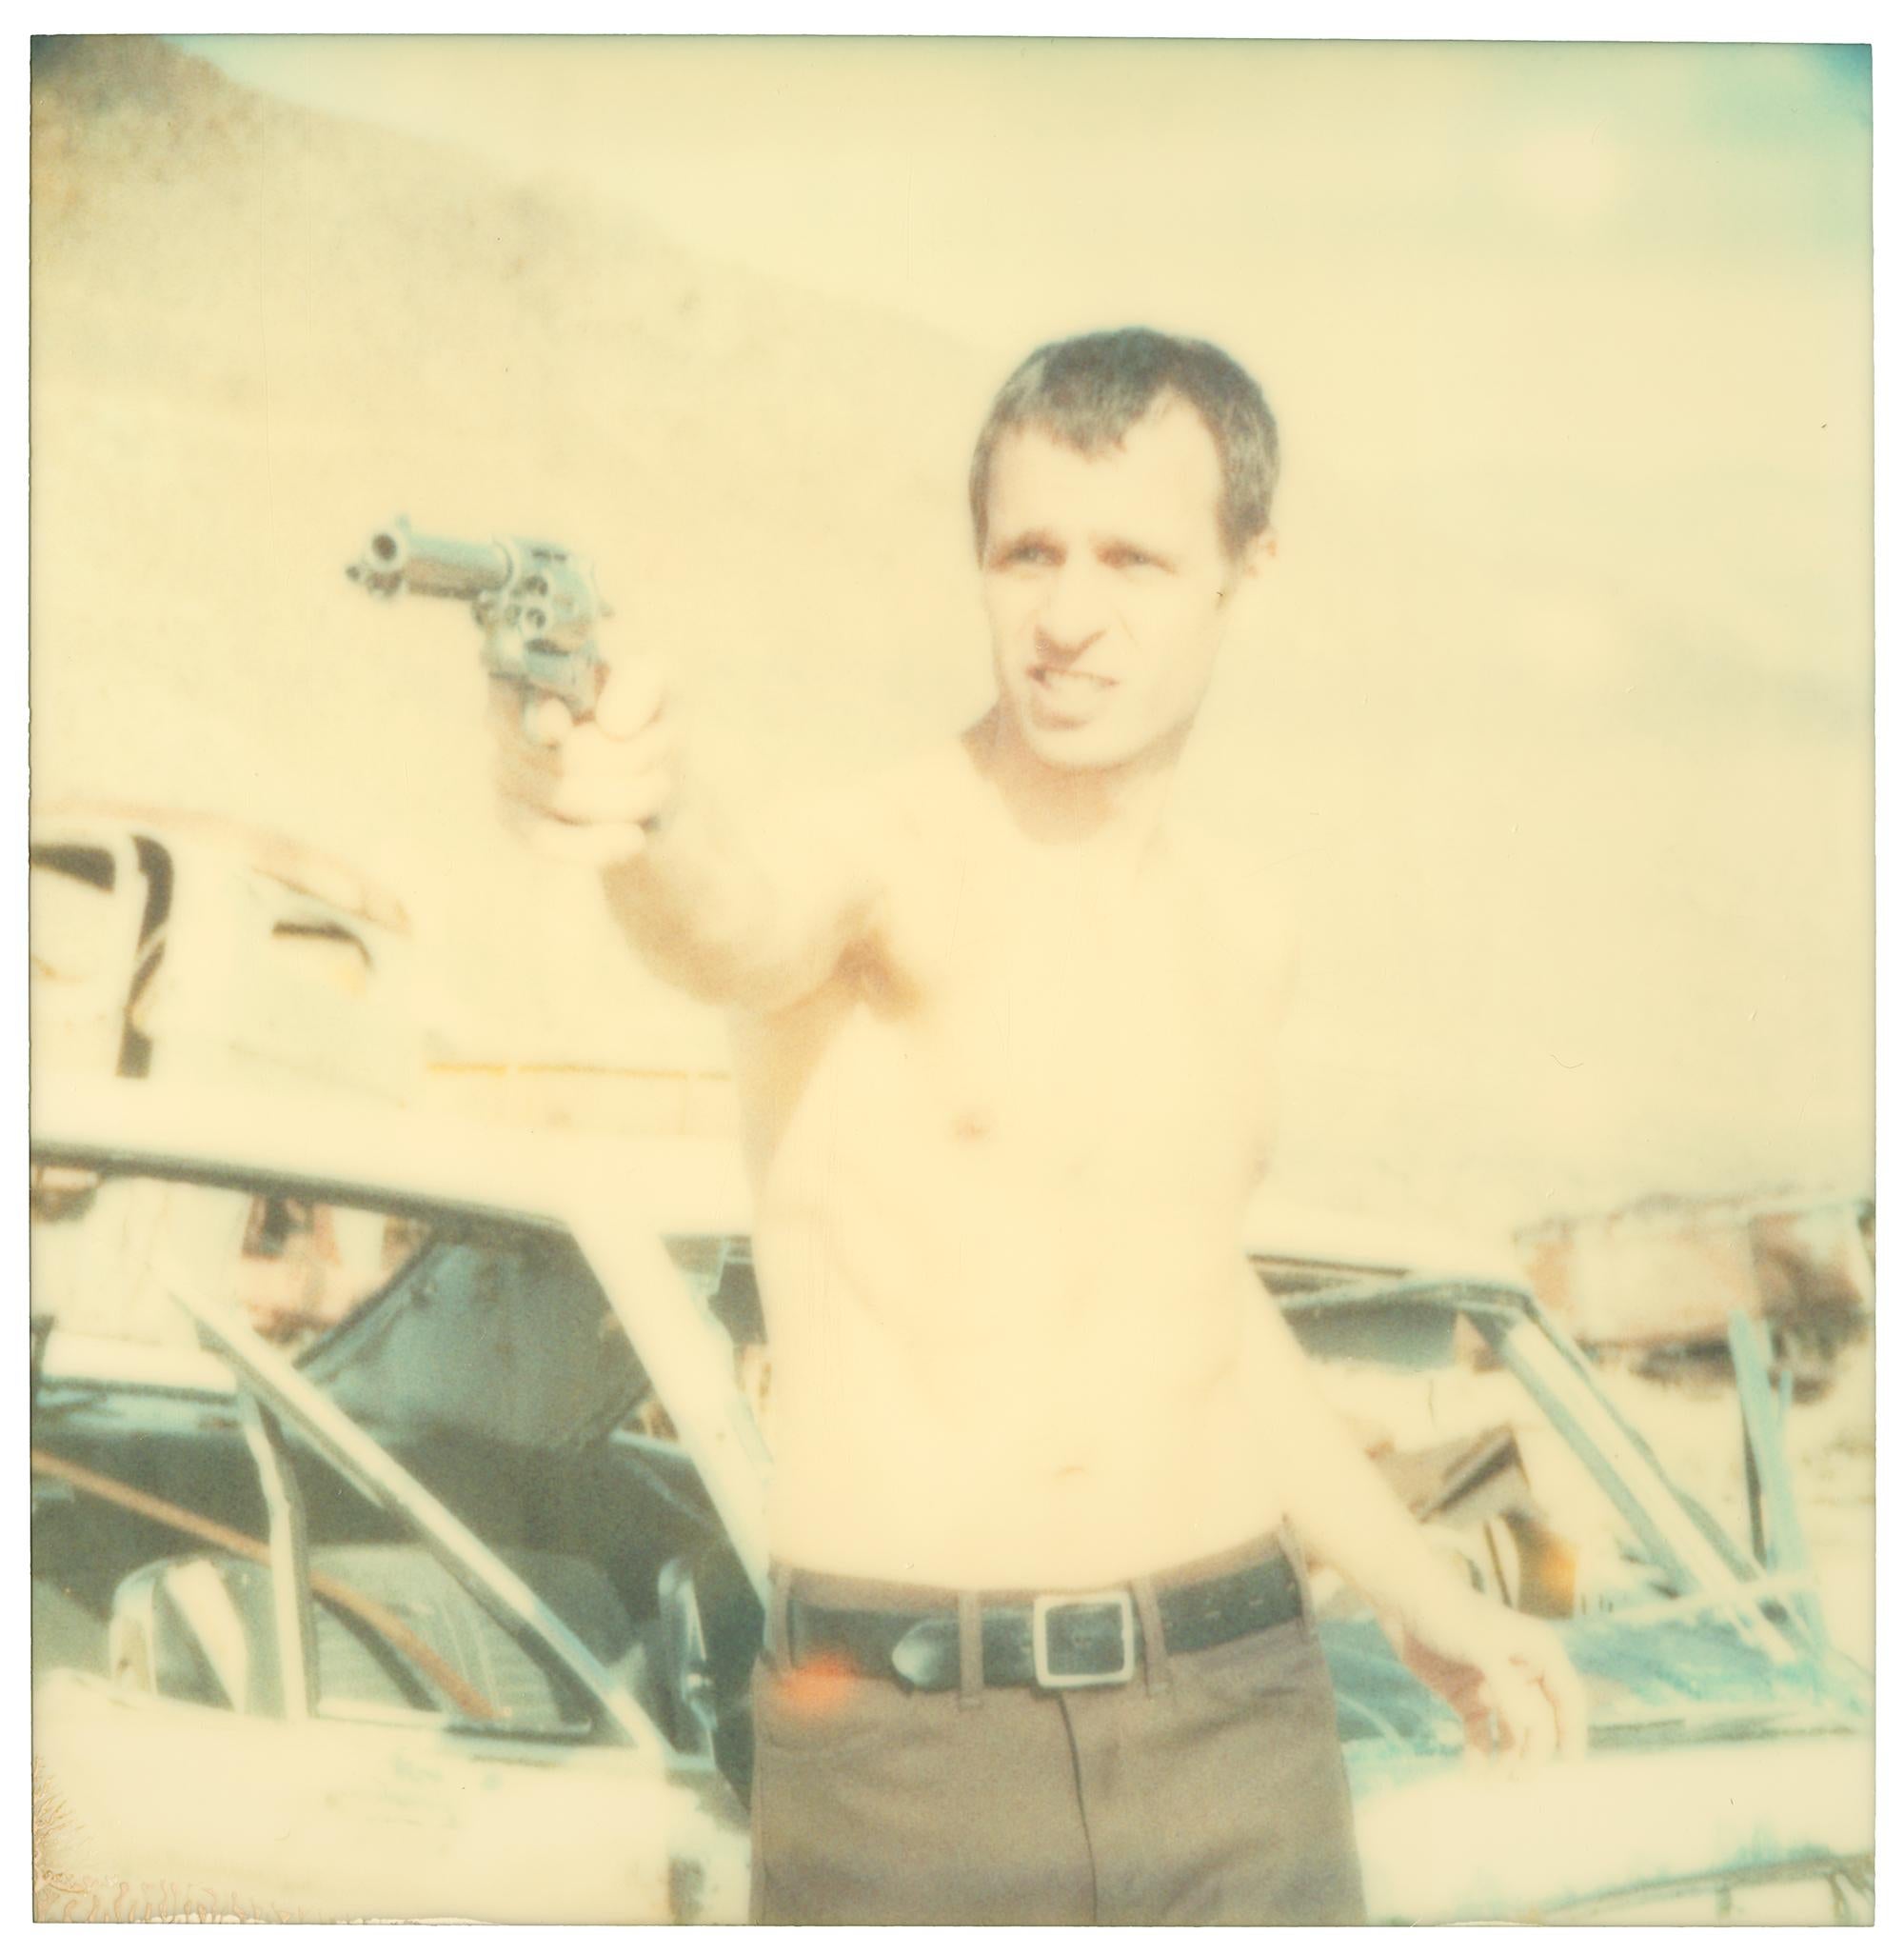 Reload! (Wastelands) - mounted - Polaroid, Contemporary, 21st Century, Color